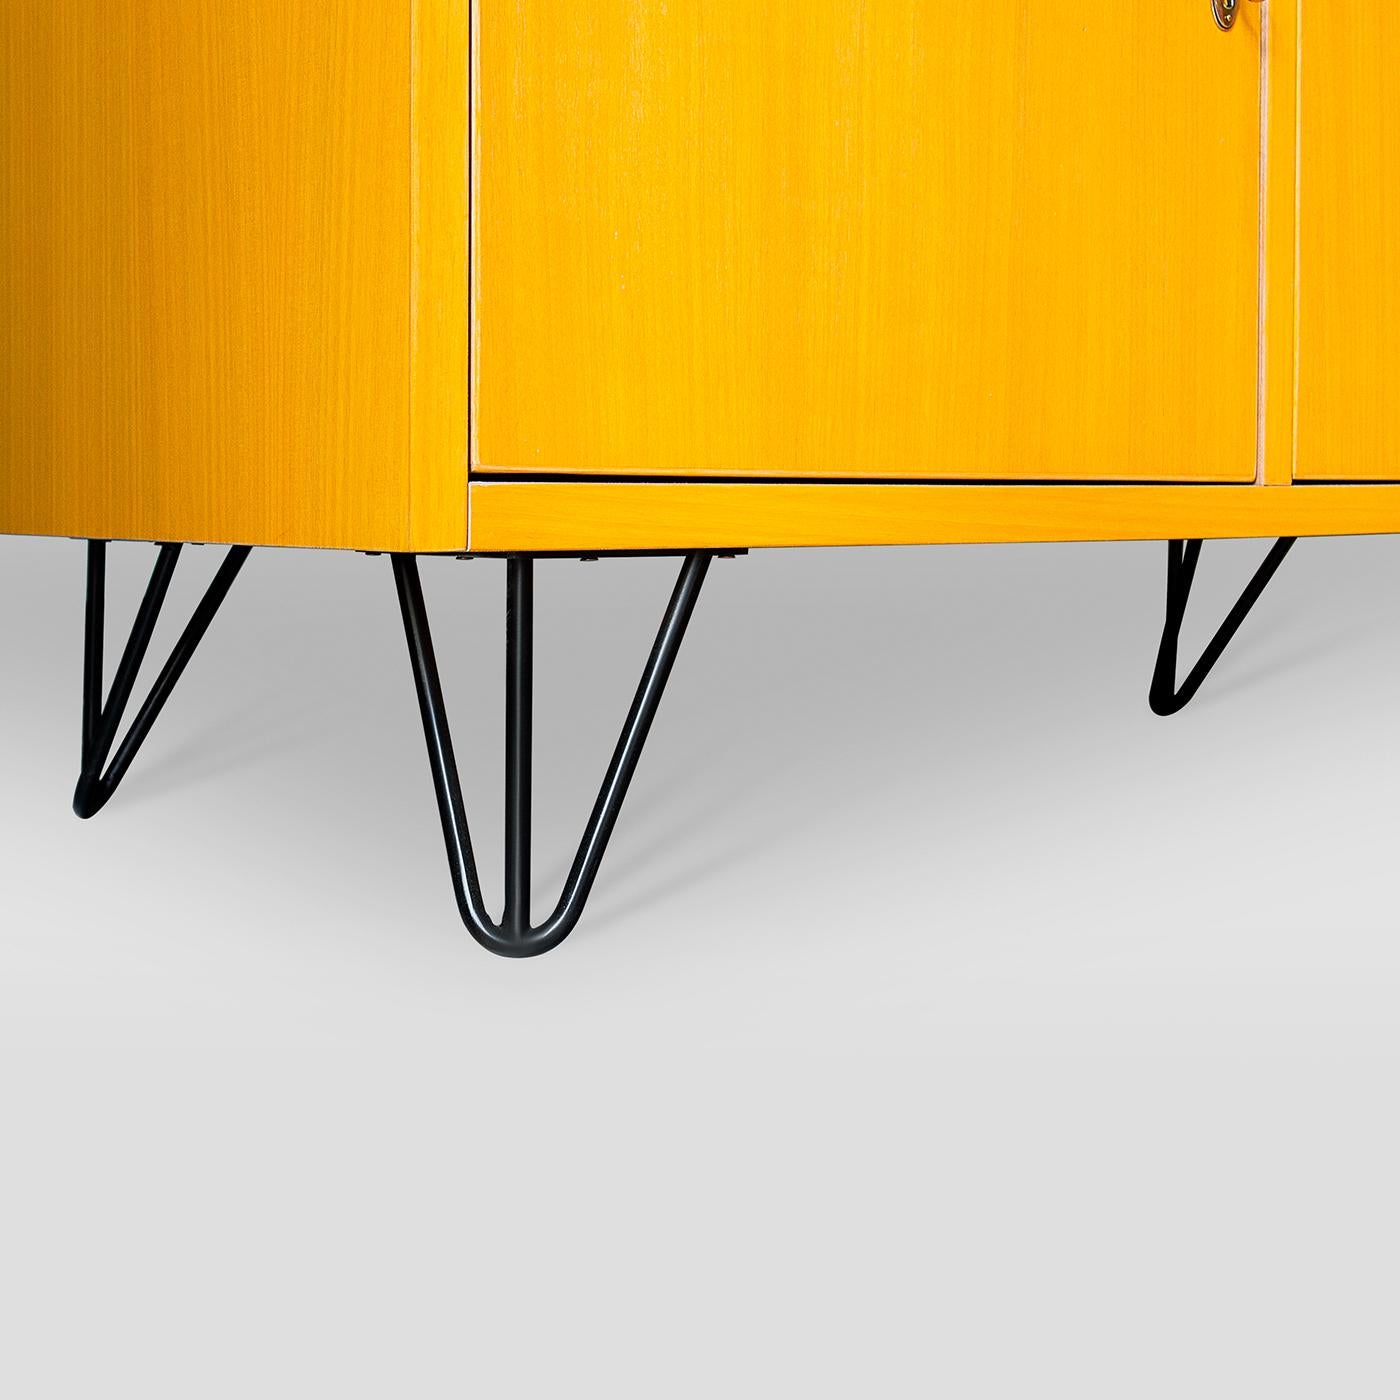 The use of solid oak, showcased with its natural finish on the inside and externally stained in vivid yellow, defines this stylish cabinet with iconic '50s elegance. Raised on metal wire feet, it offers three ample storage units each with a single